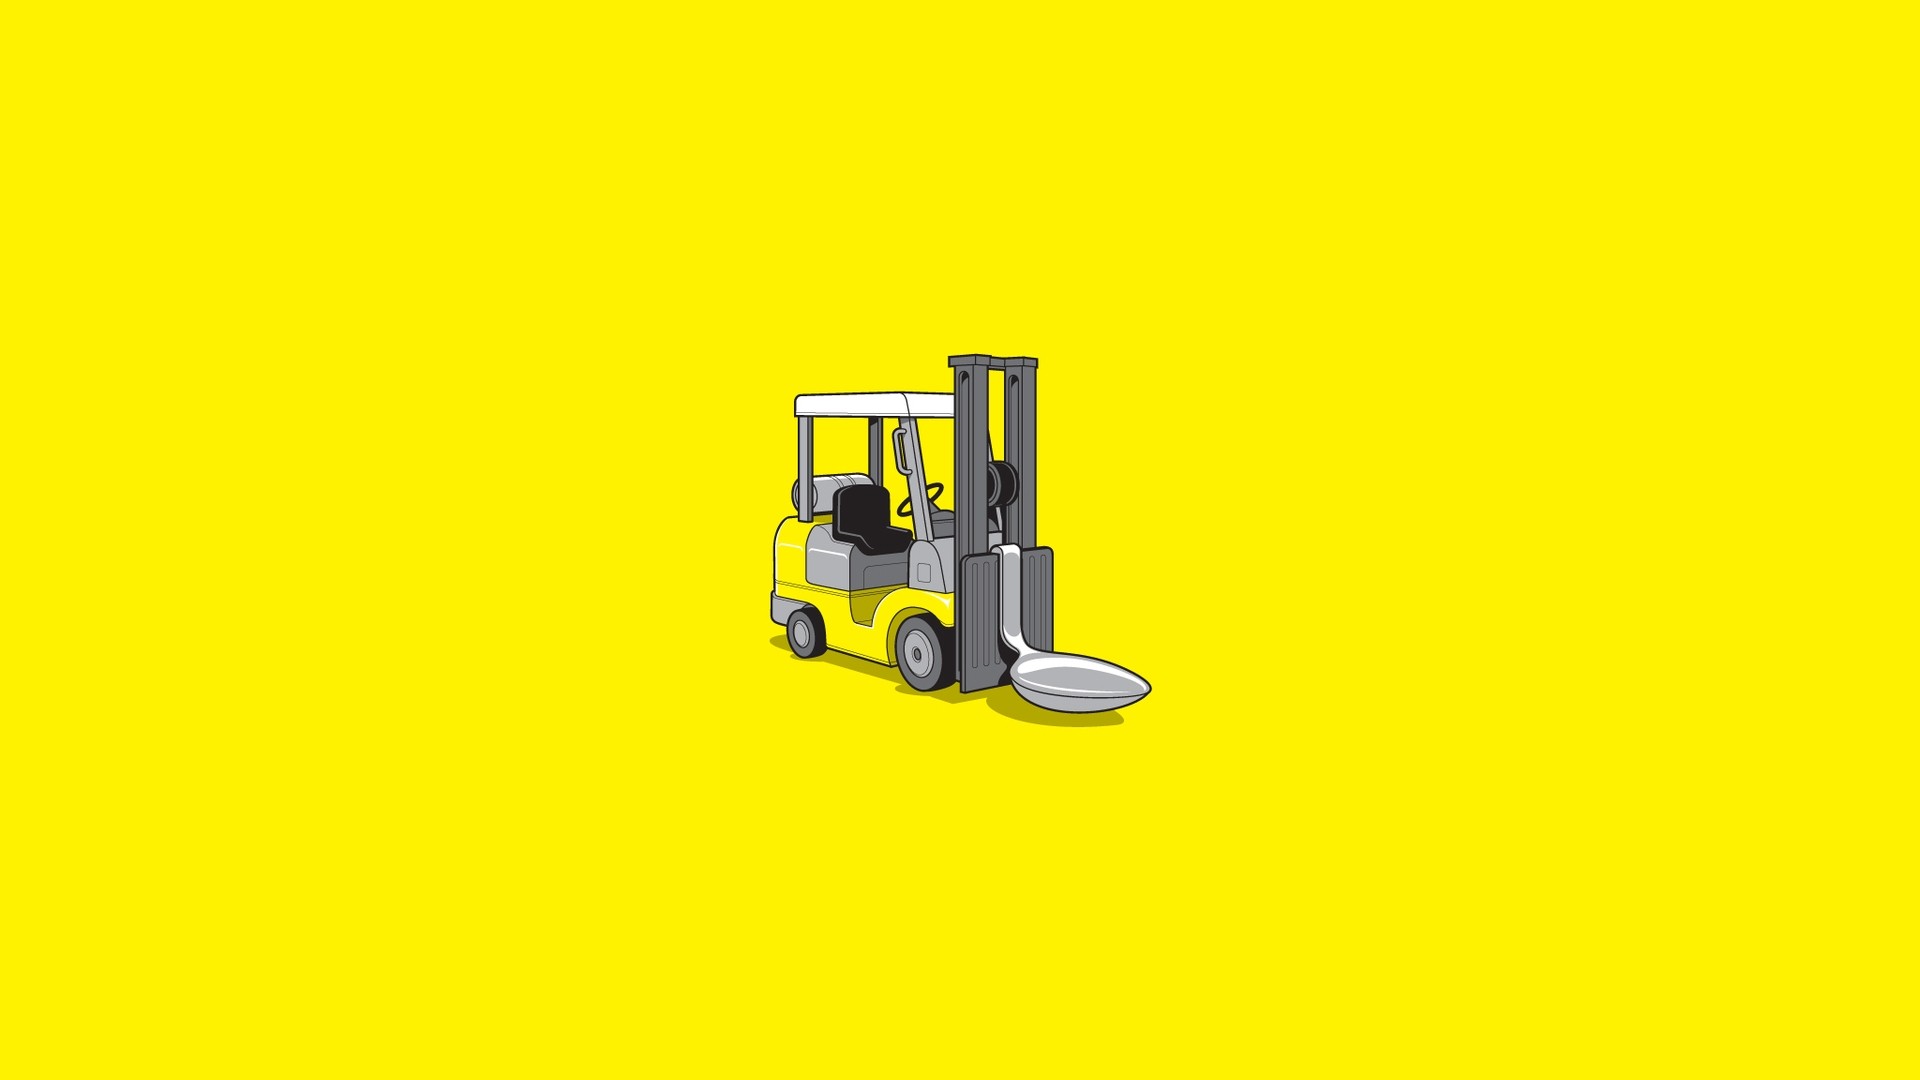 General 1920x1080 minimalism drawing digital art humor simple background forklifts spoon vehicle yellow background